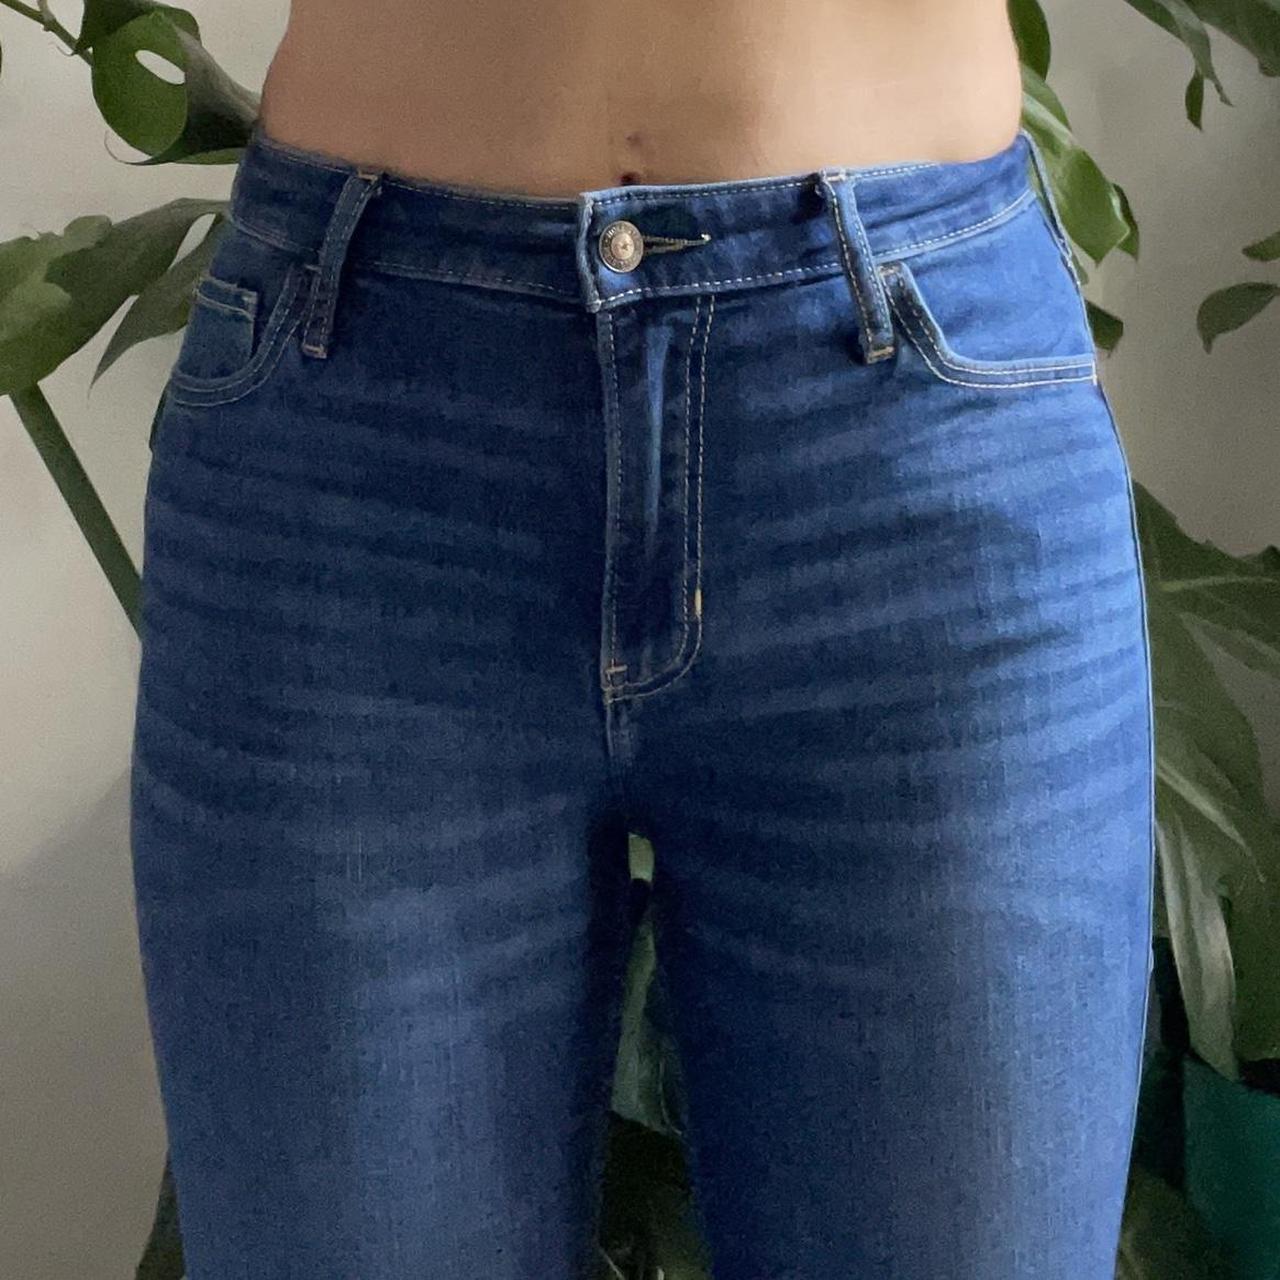 Frontal photo of a girl wearing tight Hollister jeans.